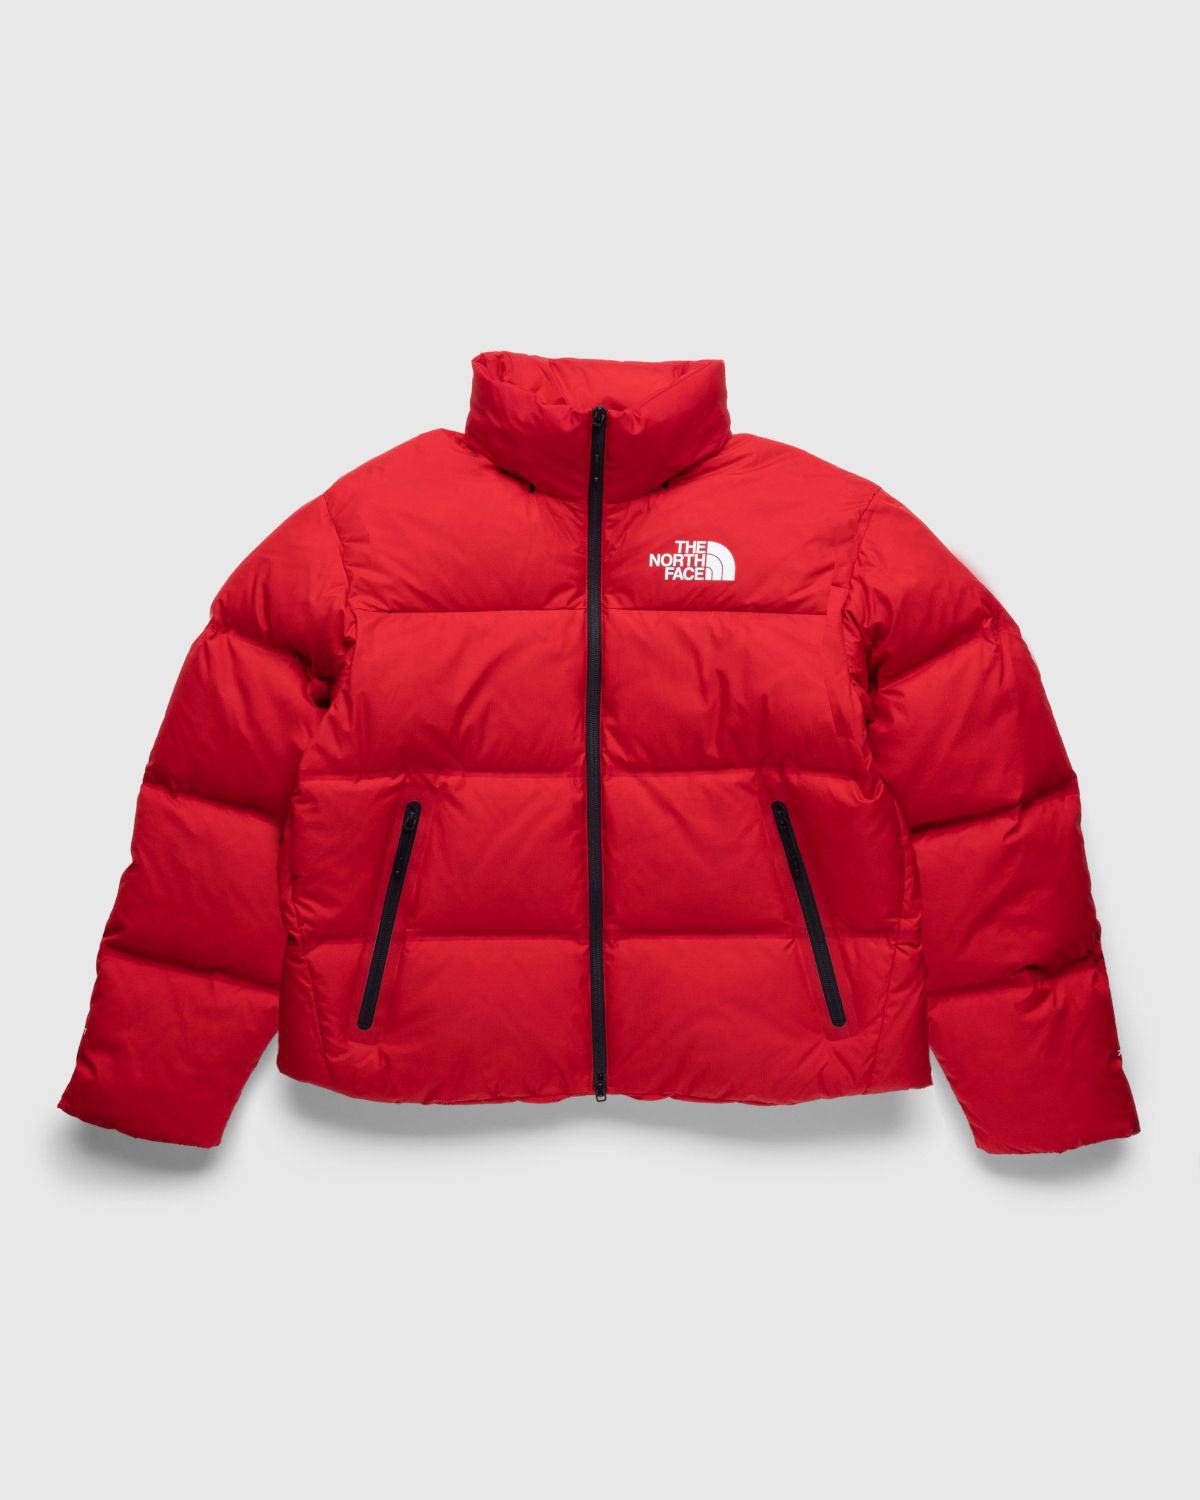 The North Face – Rmst Nuptse Jacket Red | Highsnobiety Shop